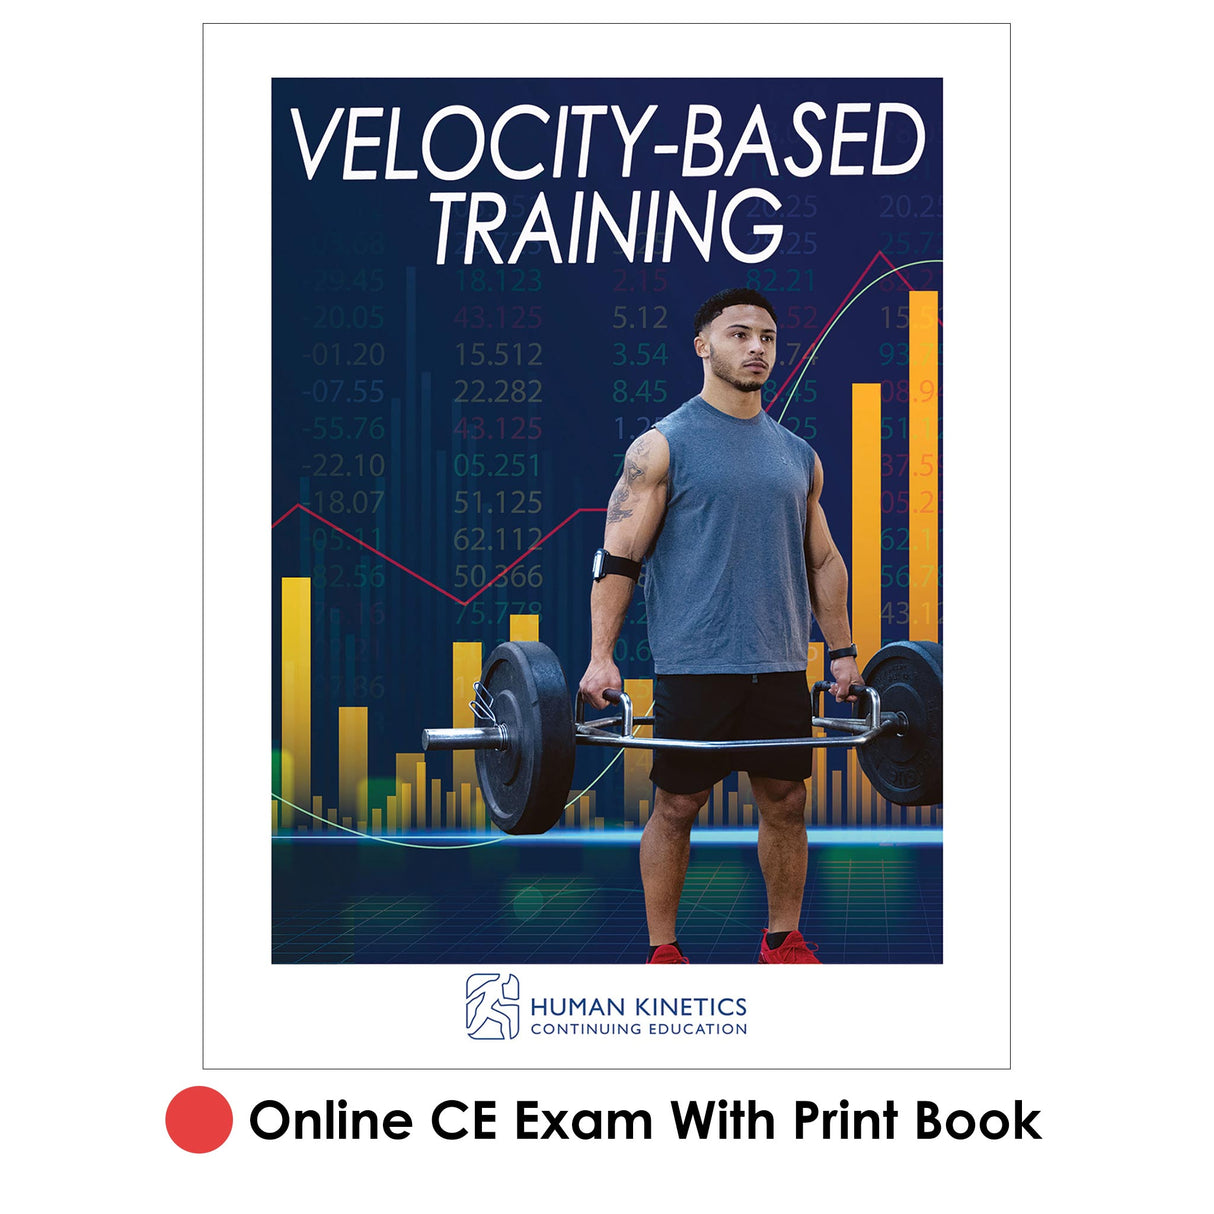 Velocity-Based Training Online CE Exam With Print Book